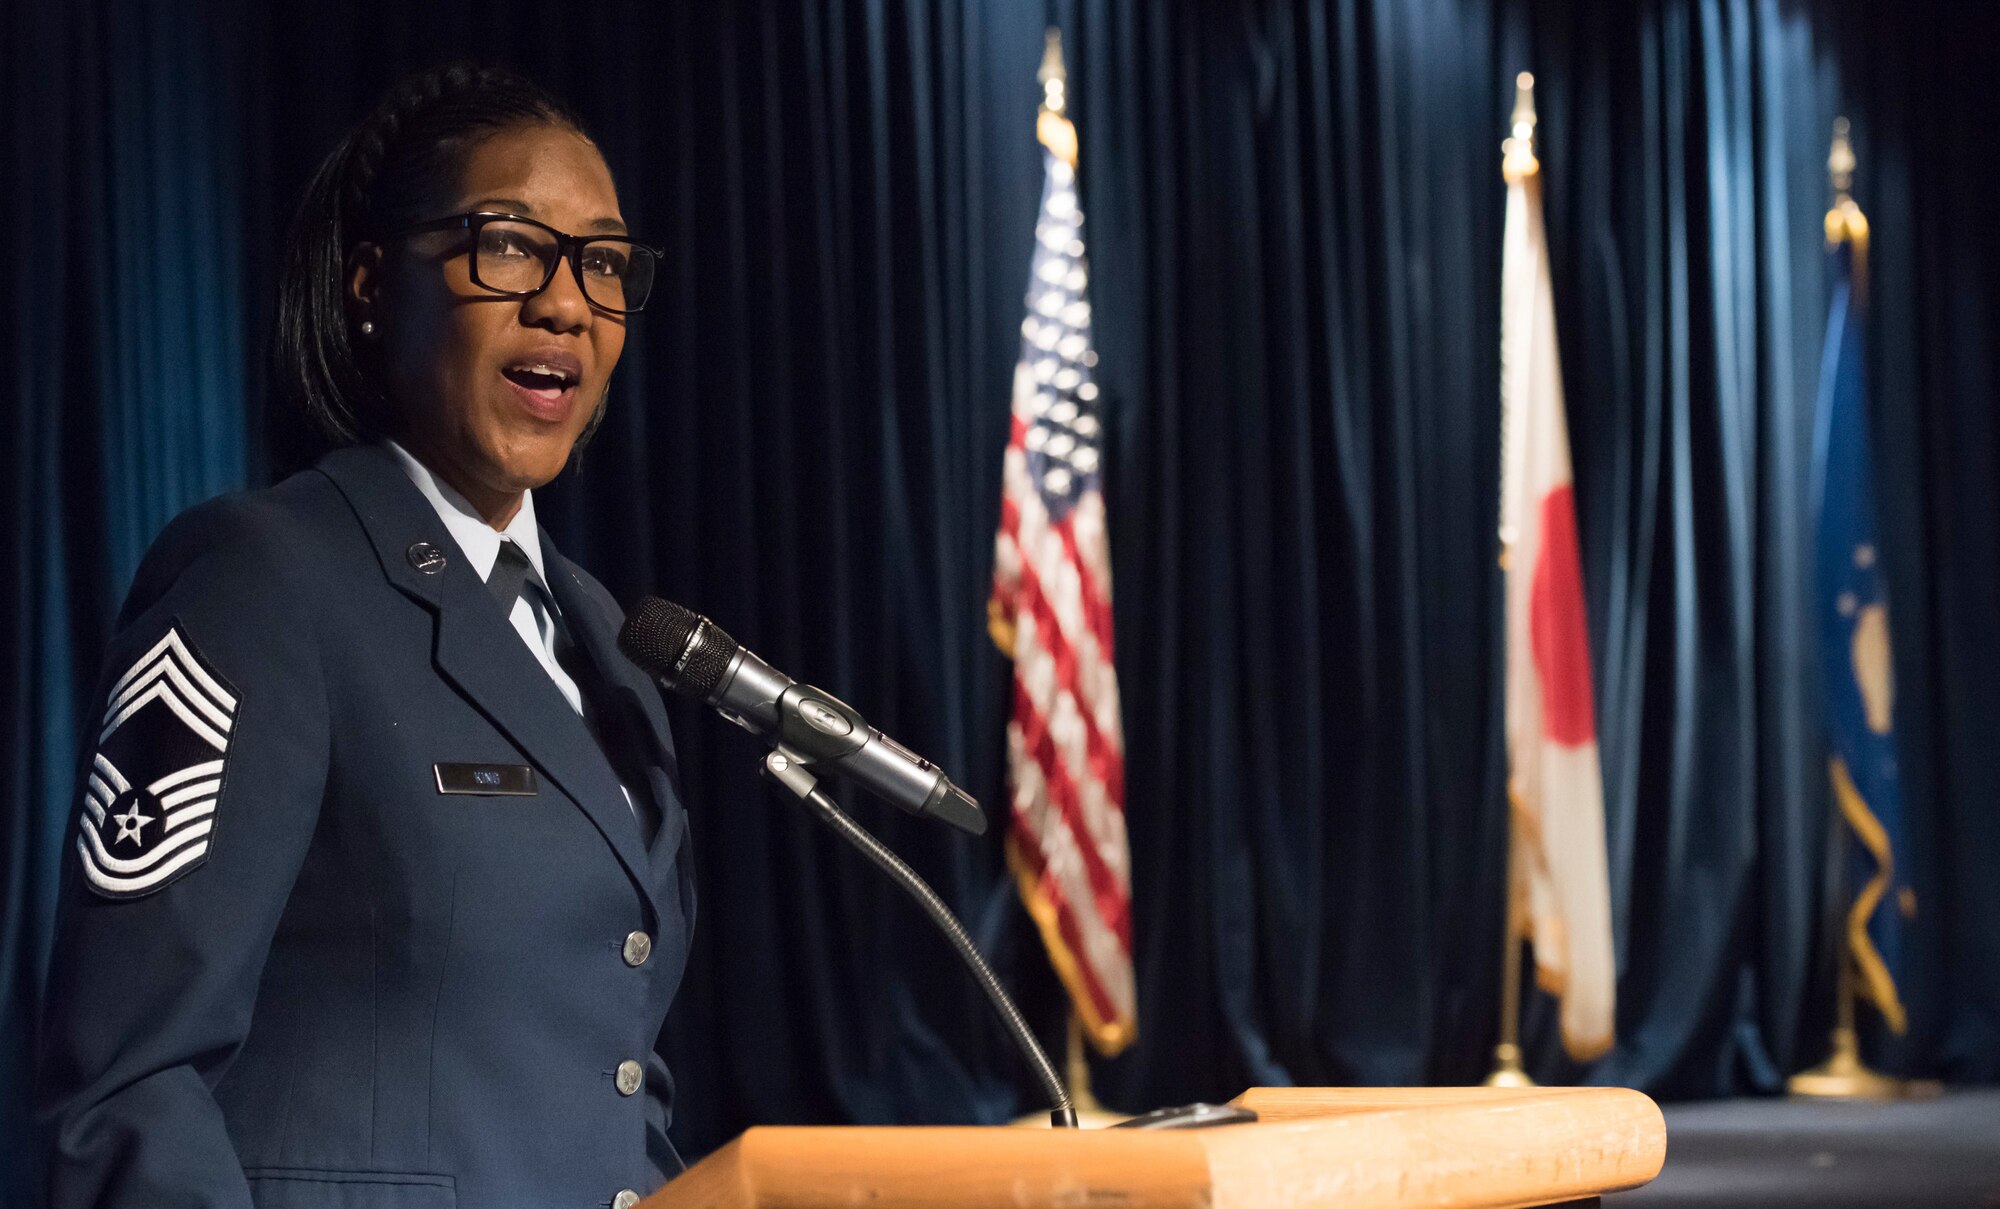 Chief Master Sgt. Tresse King, 374th Force Support Squadron superintendent, speaks during a Women’s History Month luncheon at Yokota Air Base, Japan, March 26, 2019.